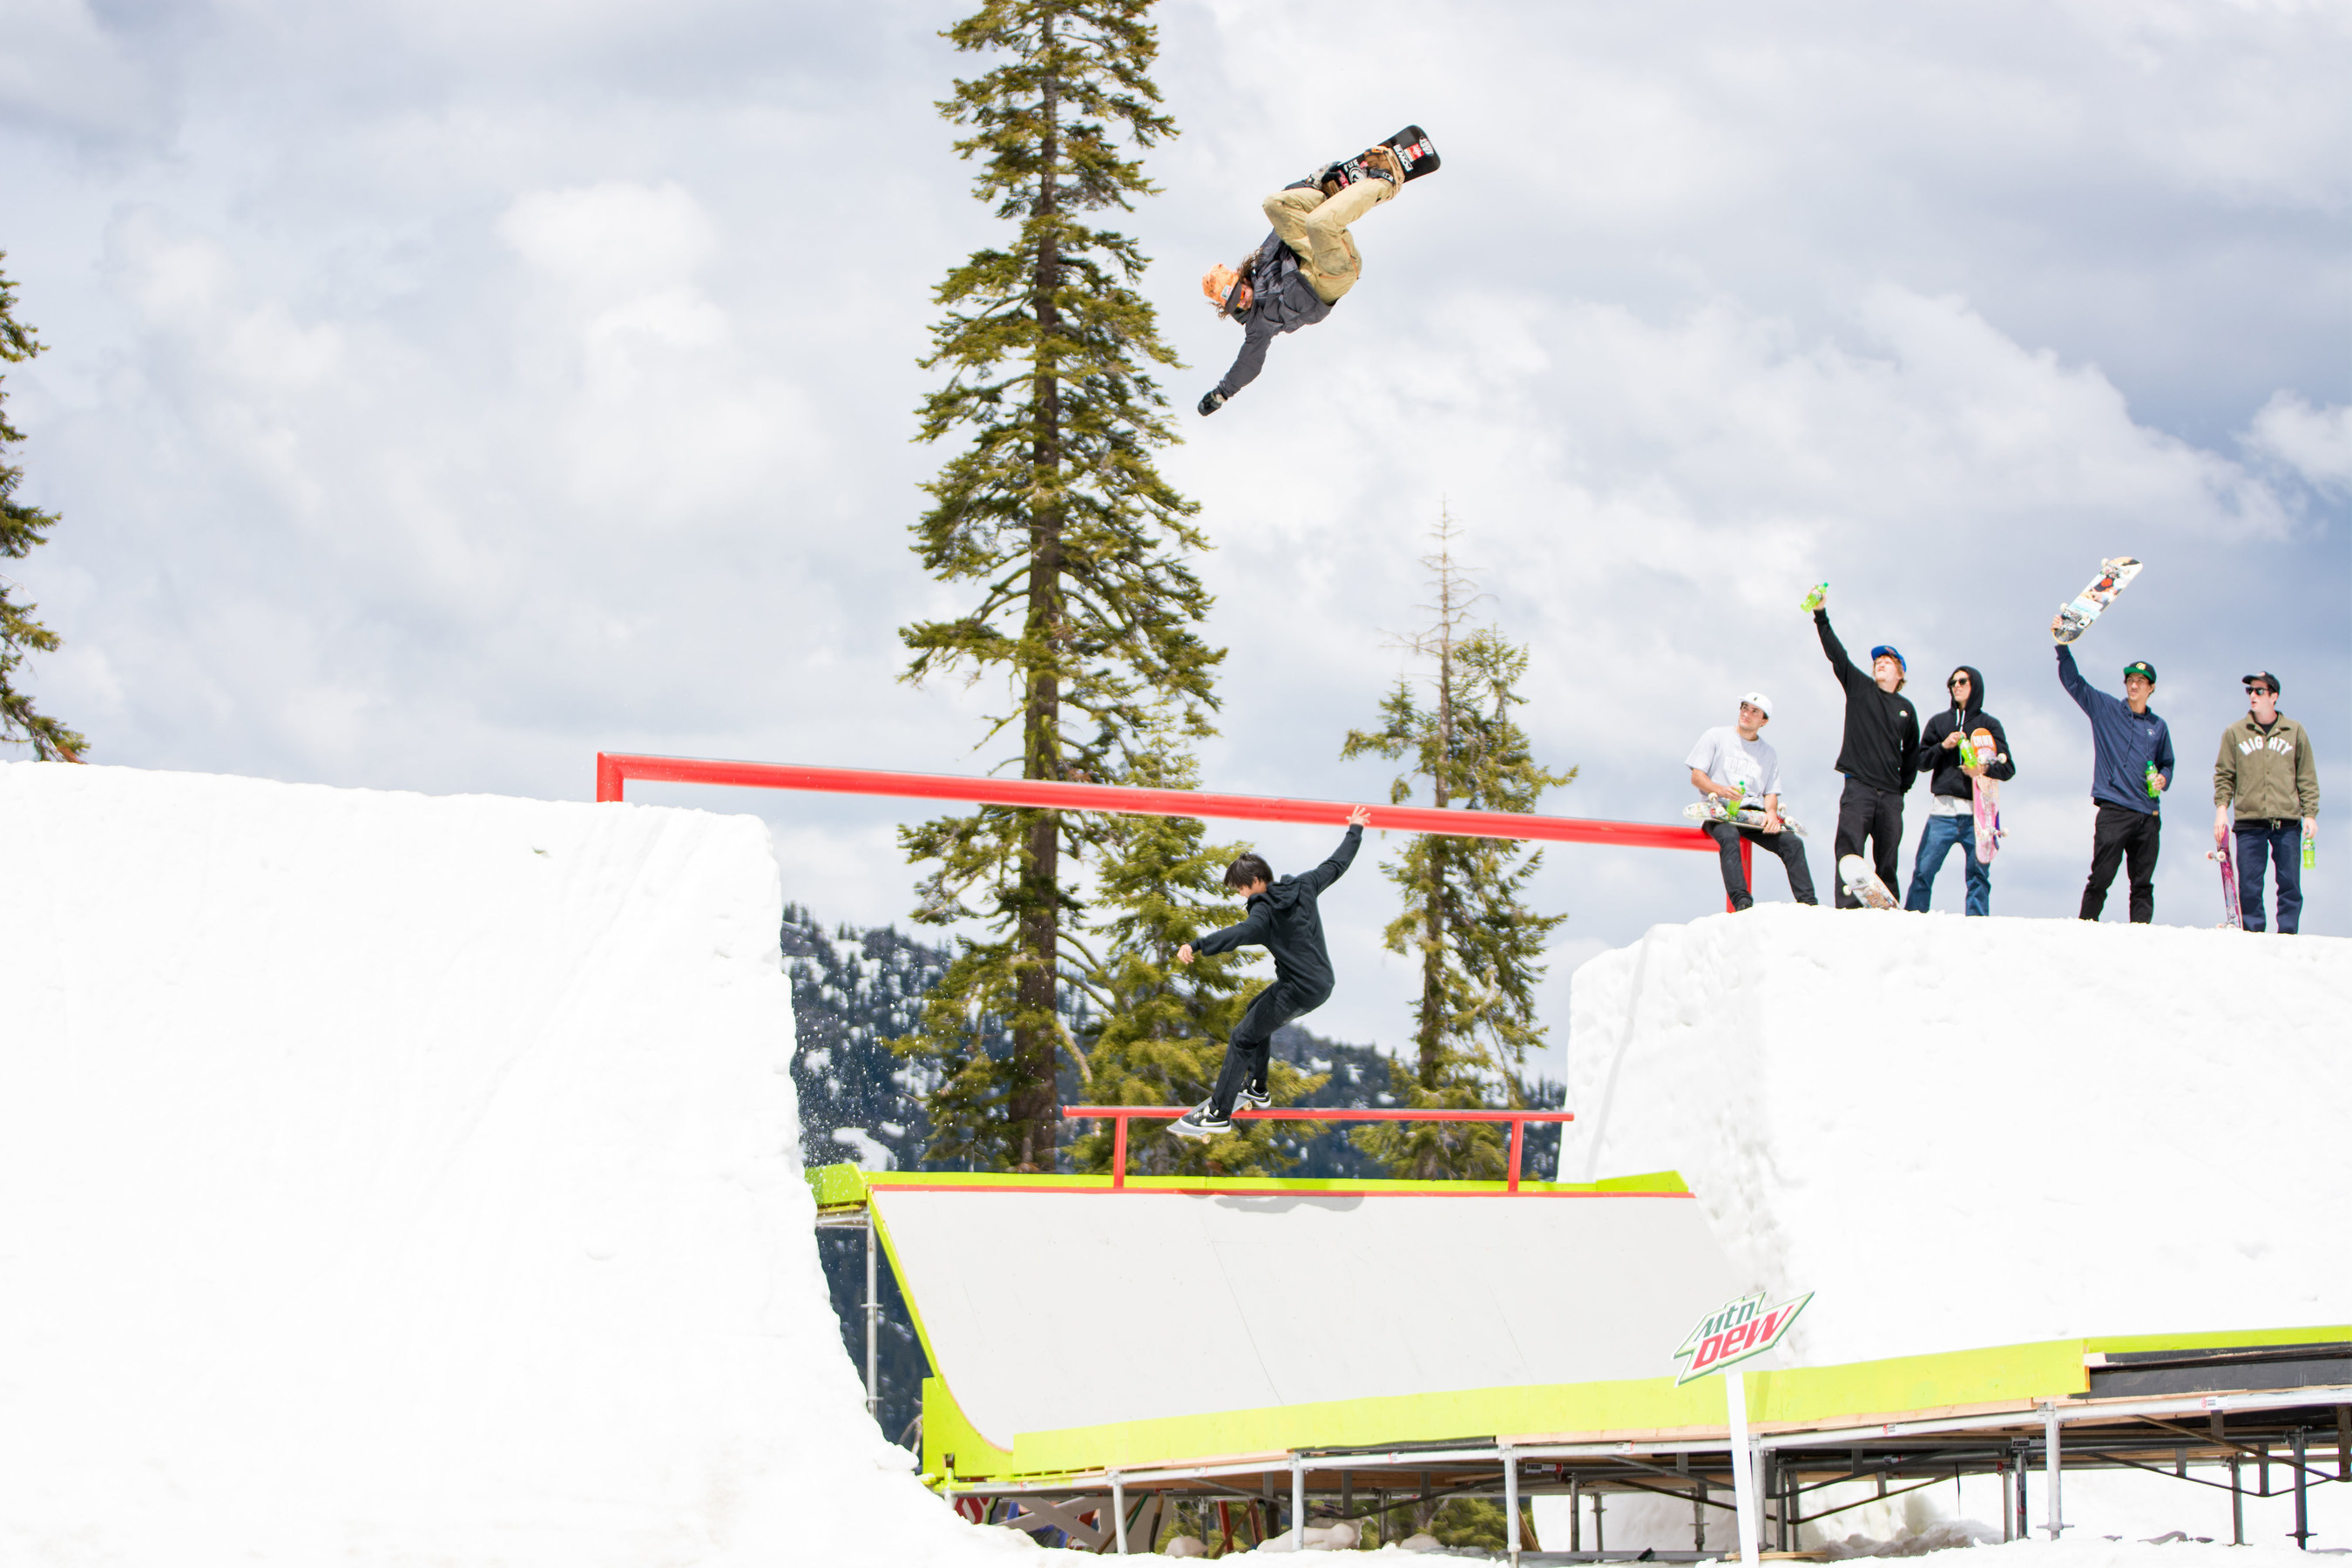 Mountain Dew creates SuperSnake, the ultimate snowboard and skateboard dream course on snow with professional athletes including Danny Davis, Sean Malto and more.